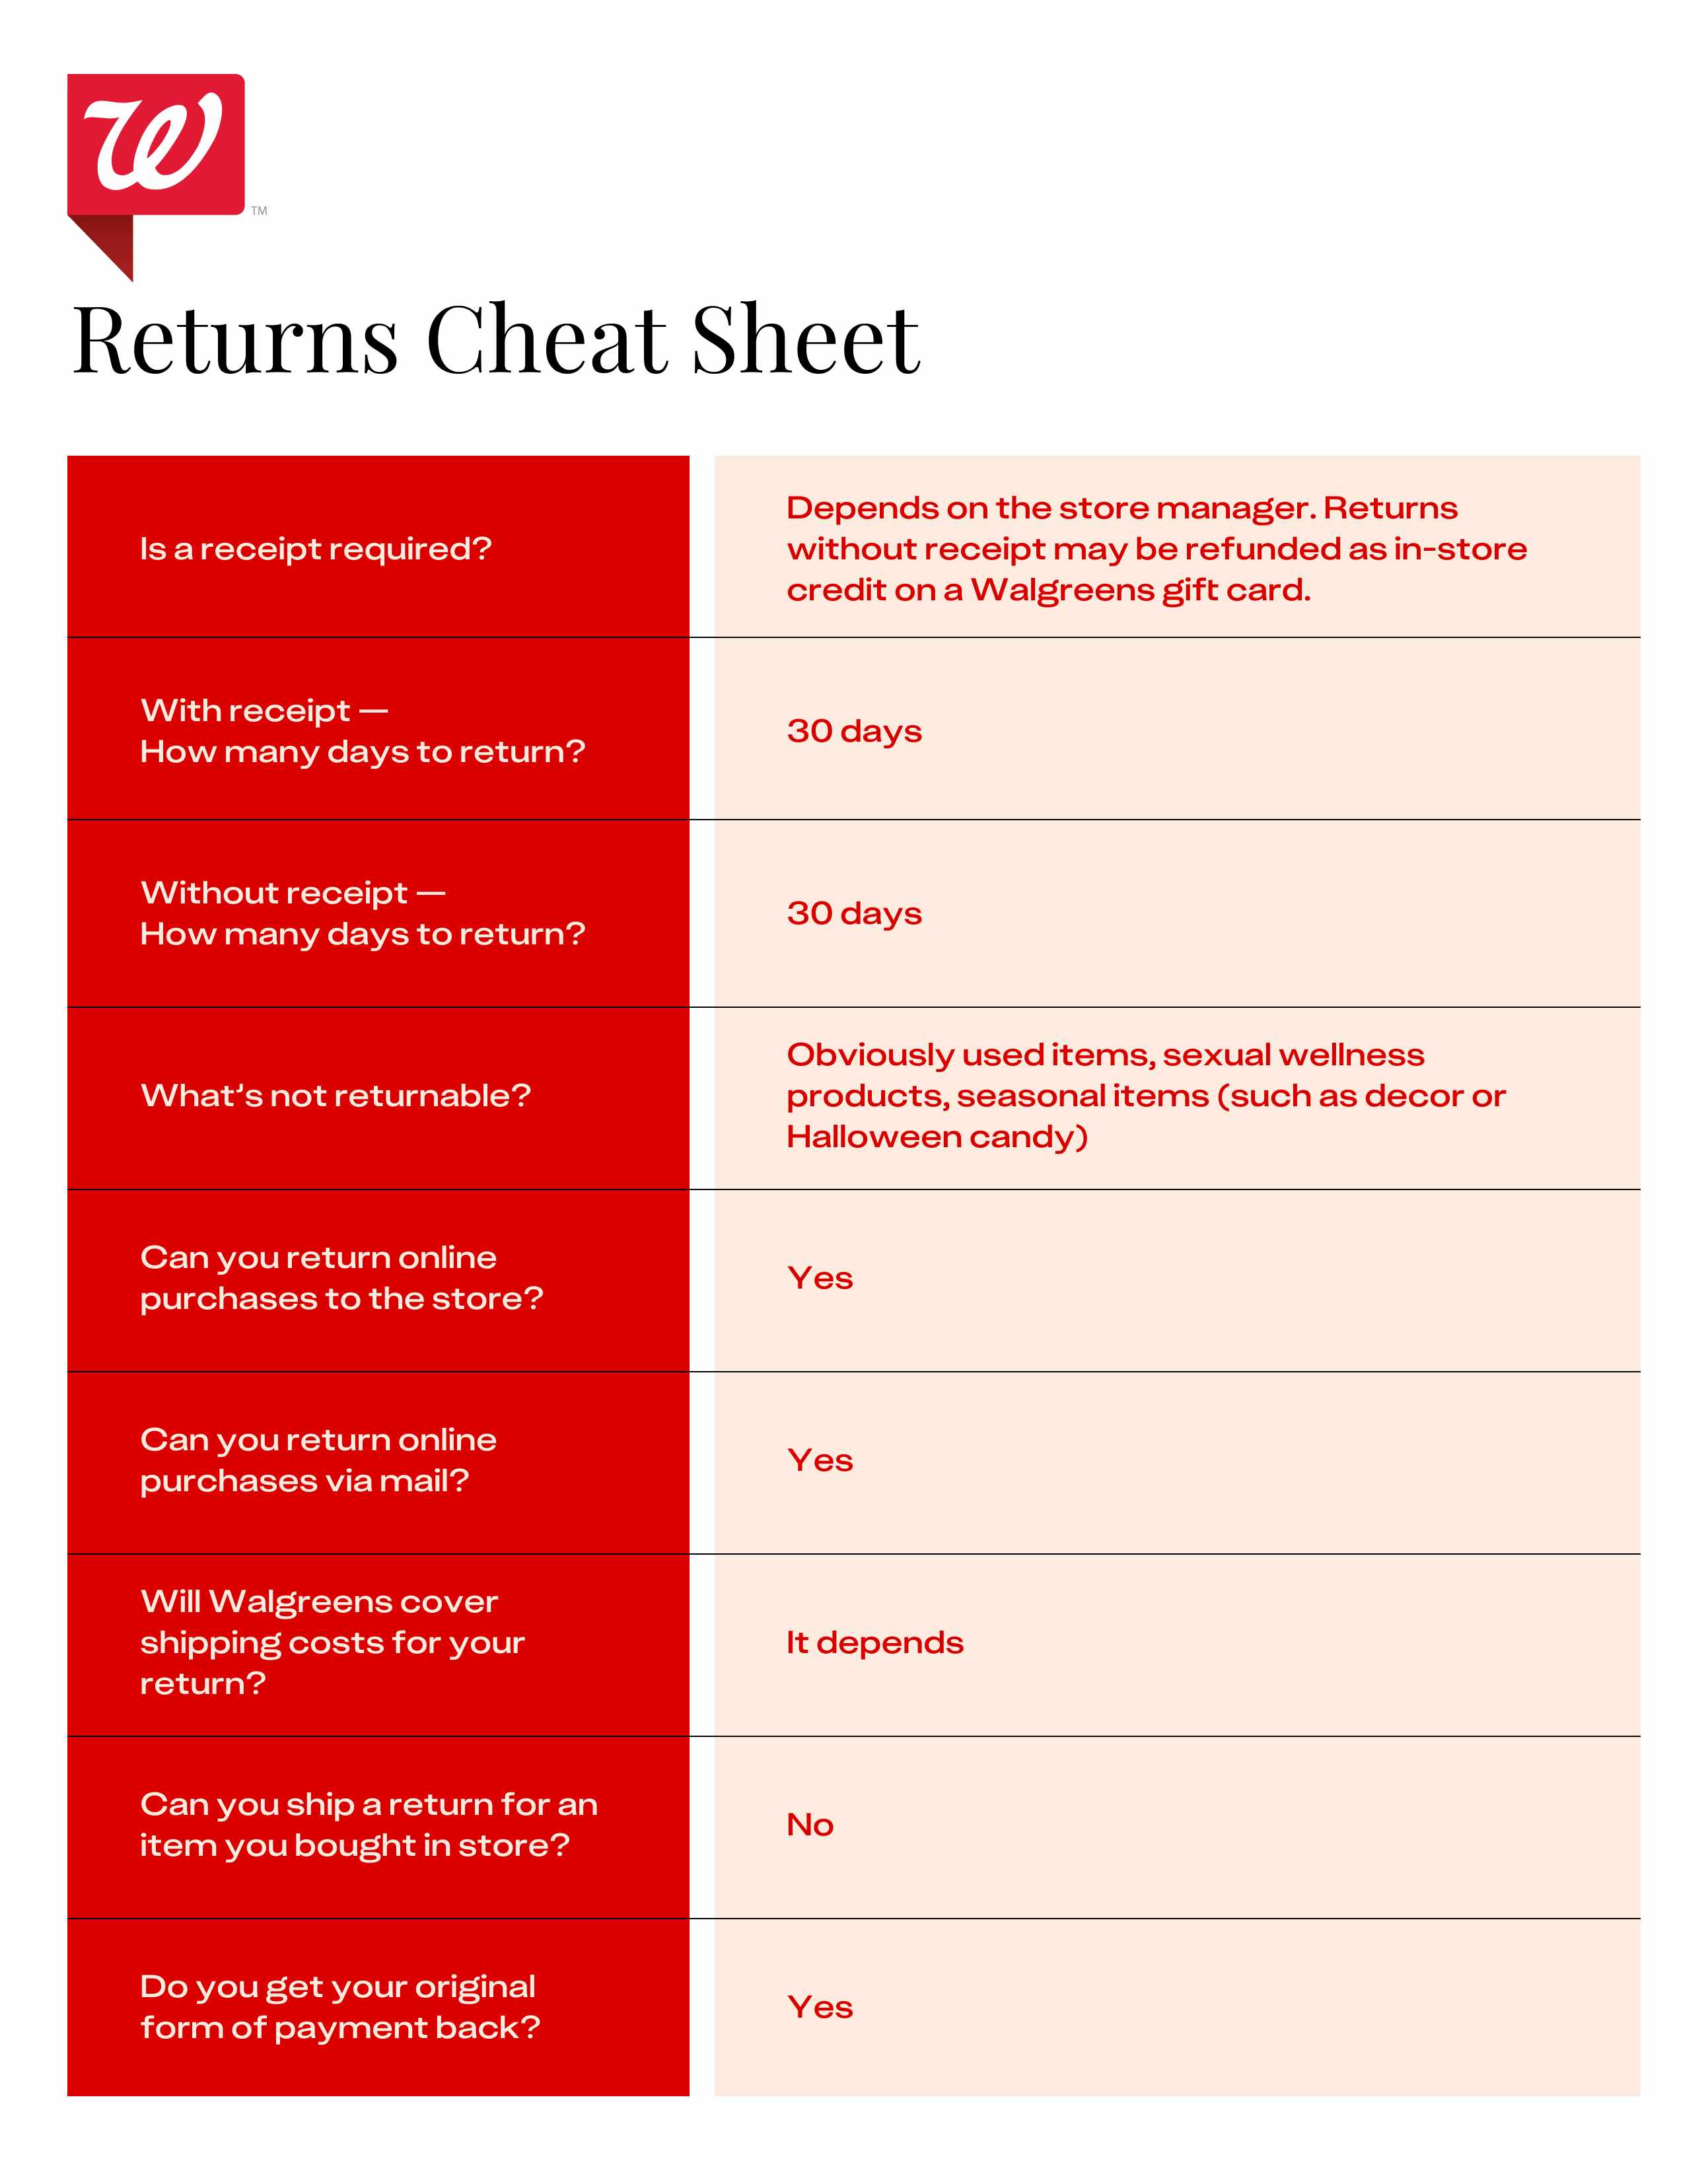 A cheat sheet of the Walgreens return policy details.